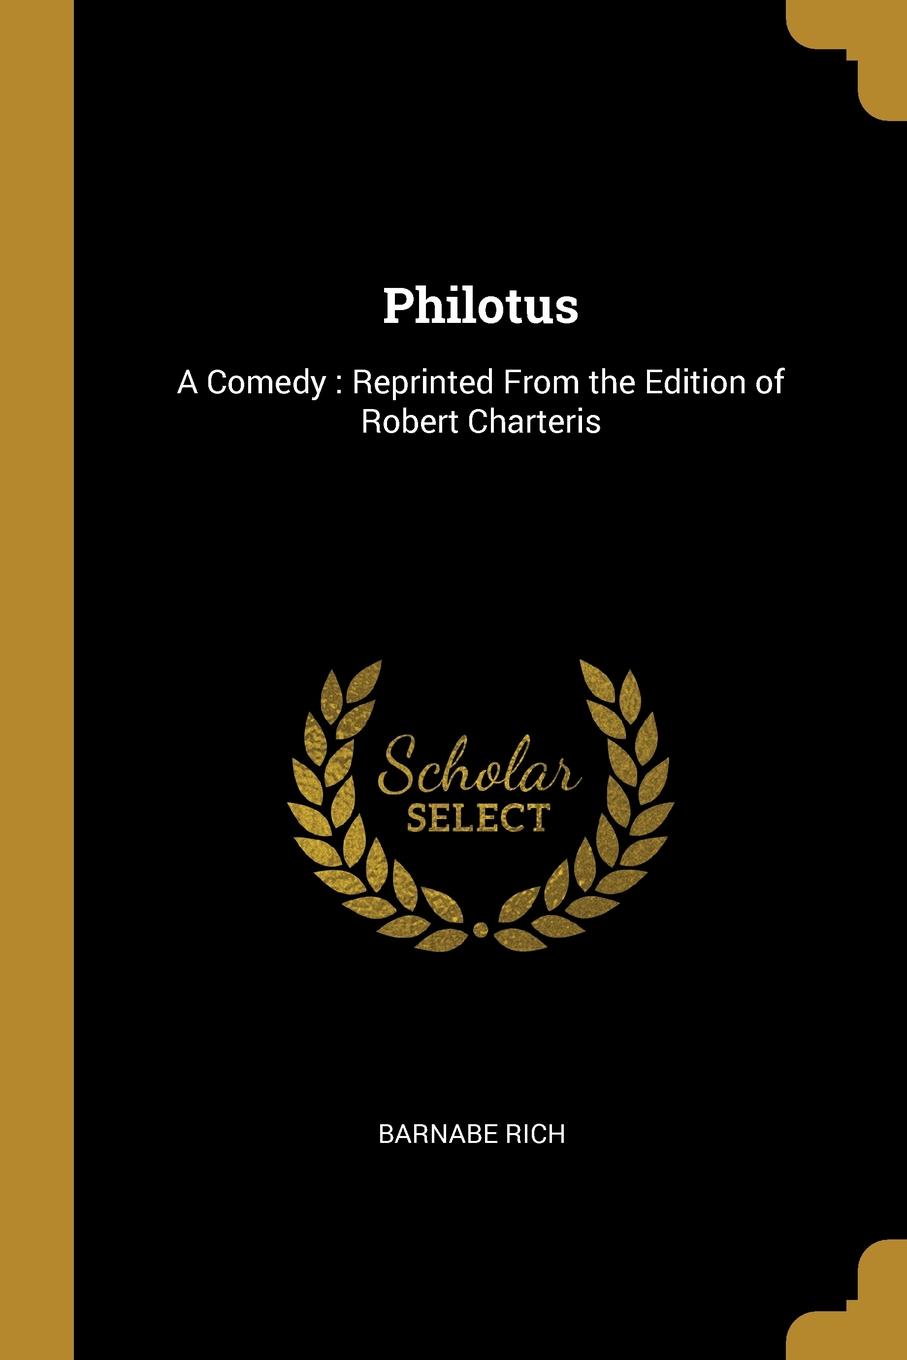 Philotus. A Comedy : Reprinted From the Edition of Robert Charteris